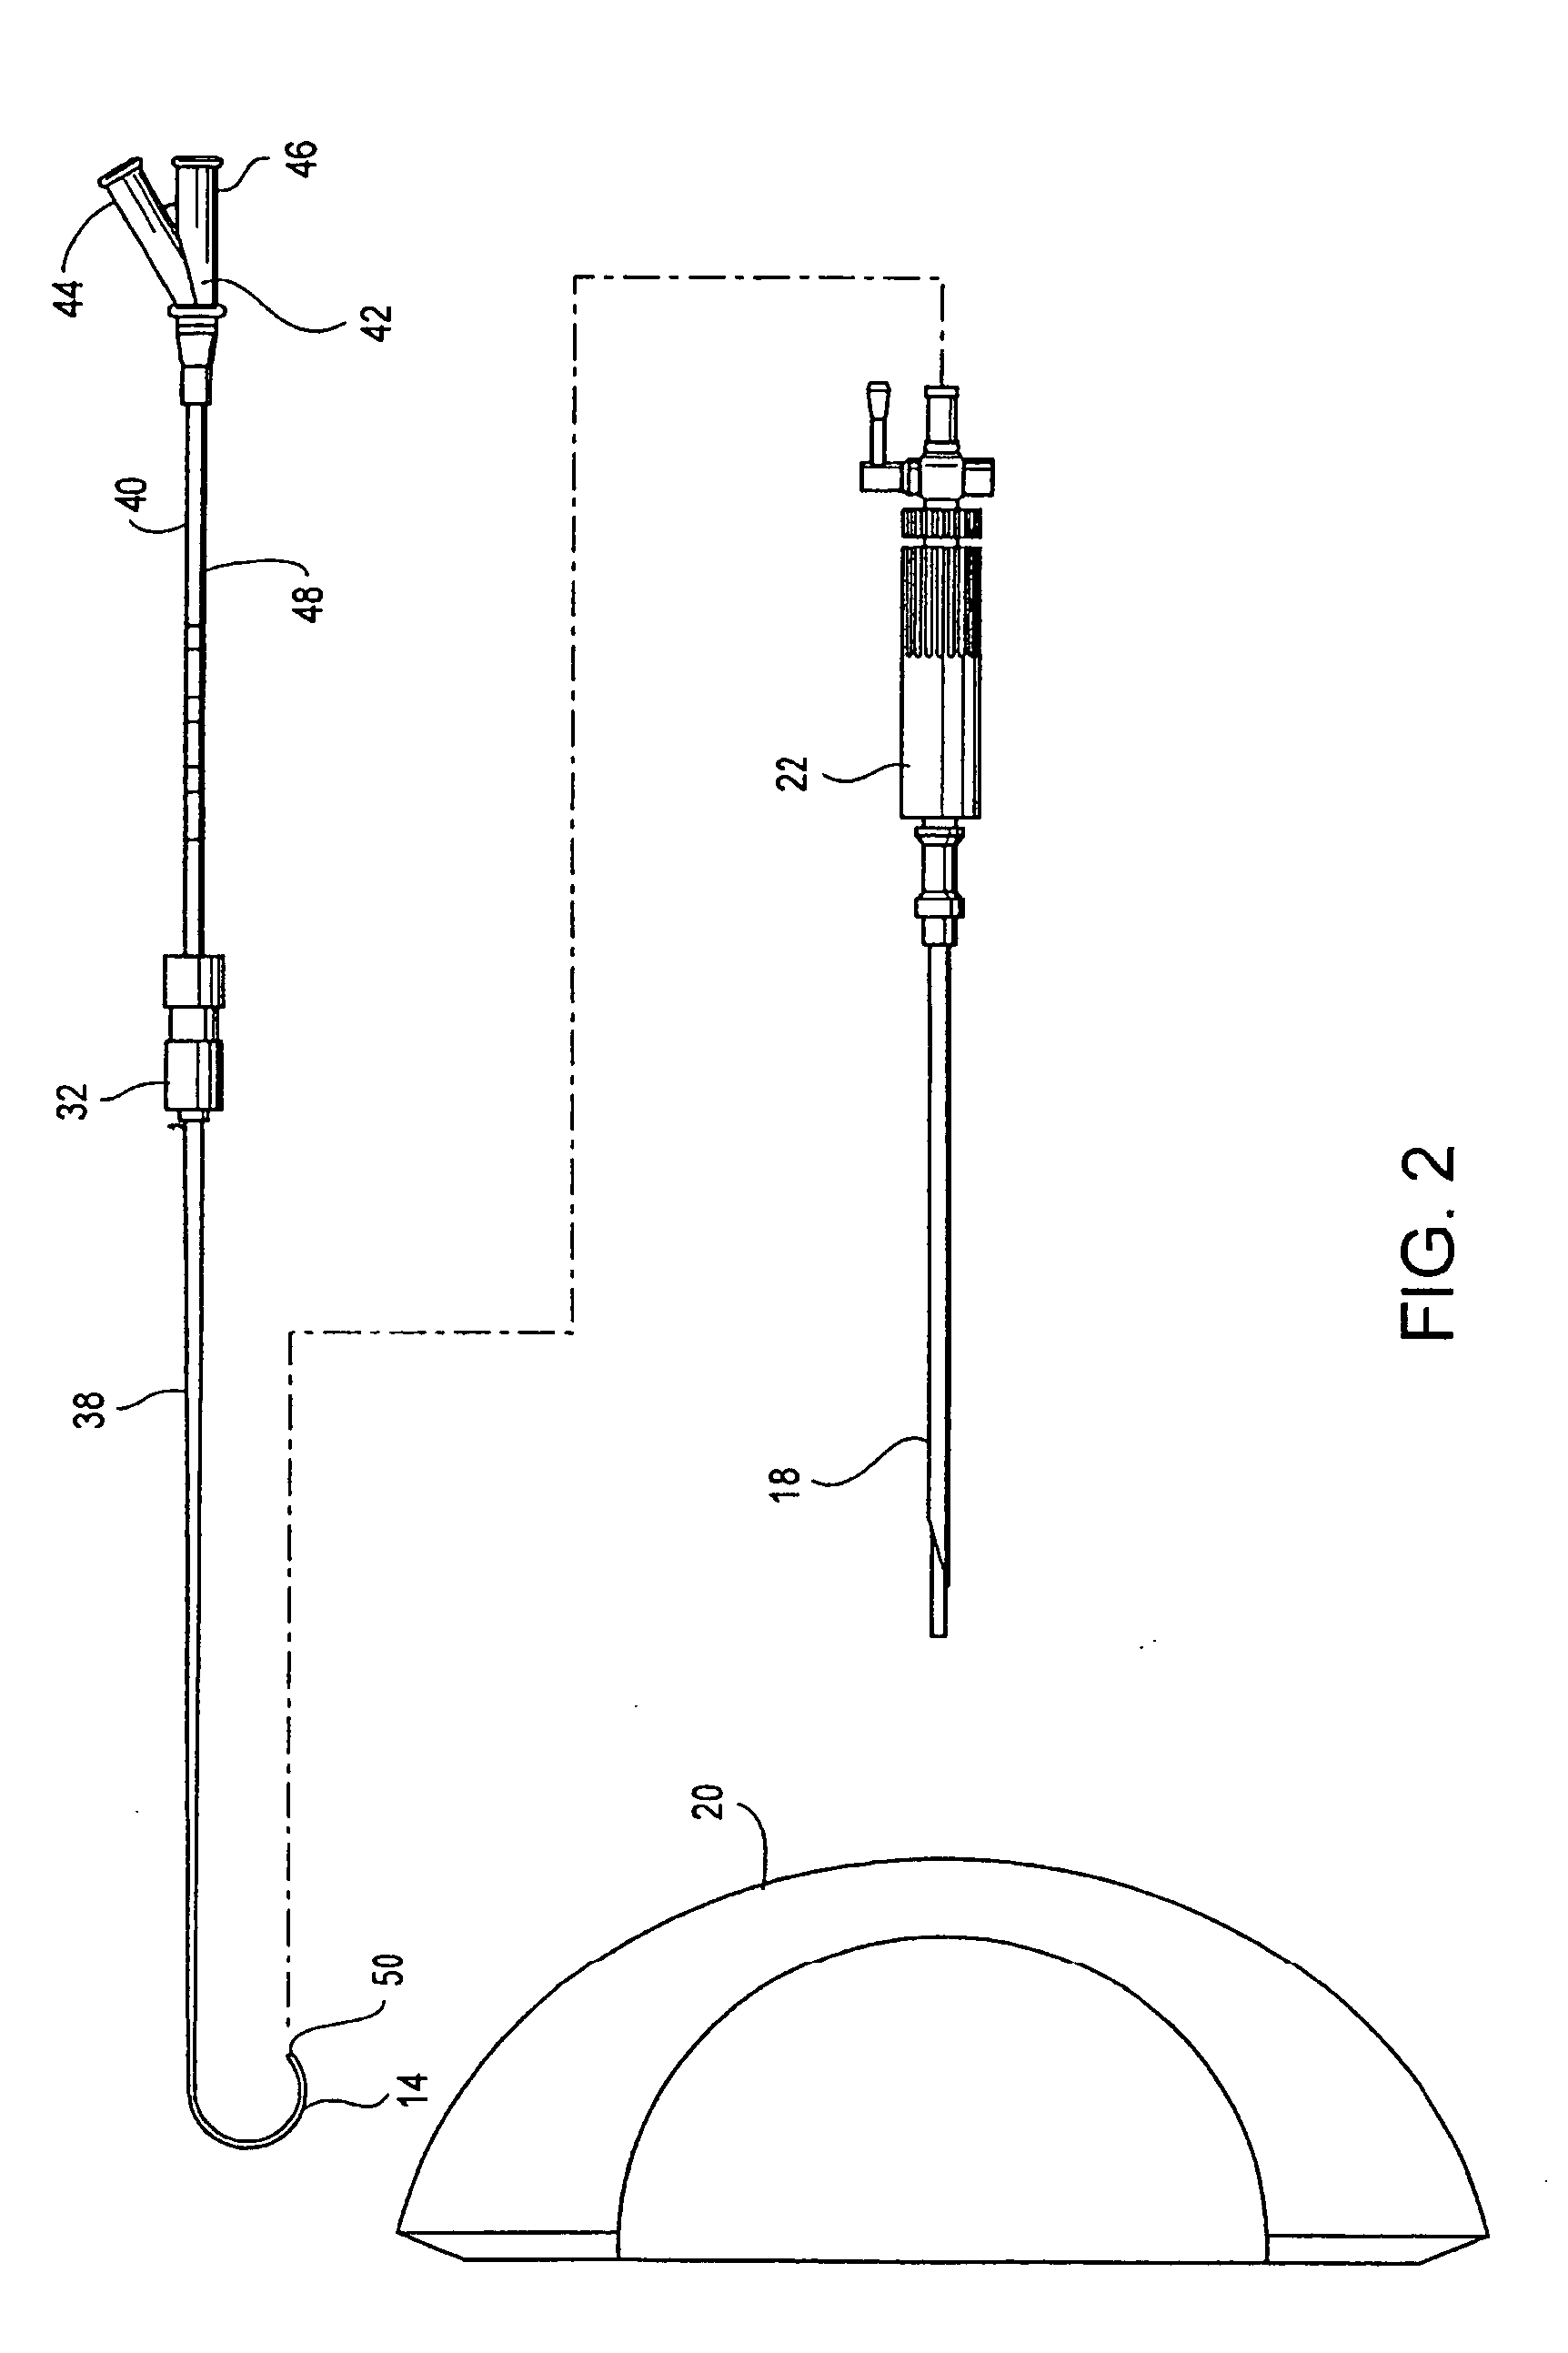 System and method for manipulating a catheter for delivering a substance to a body cavity